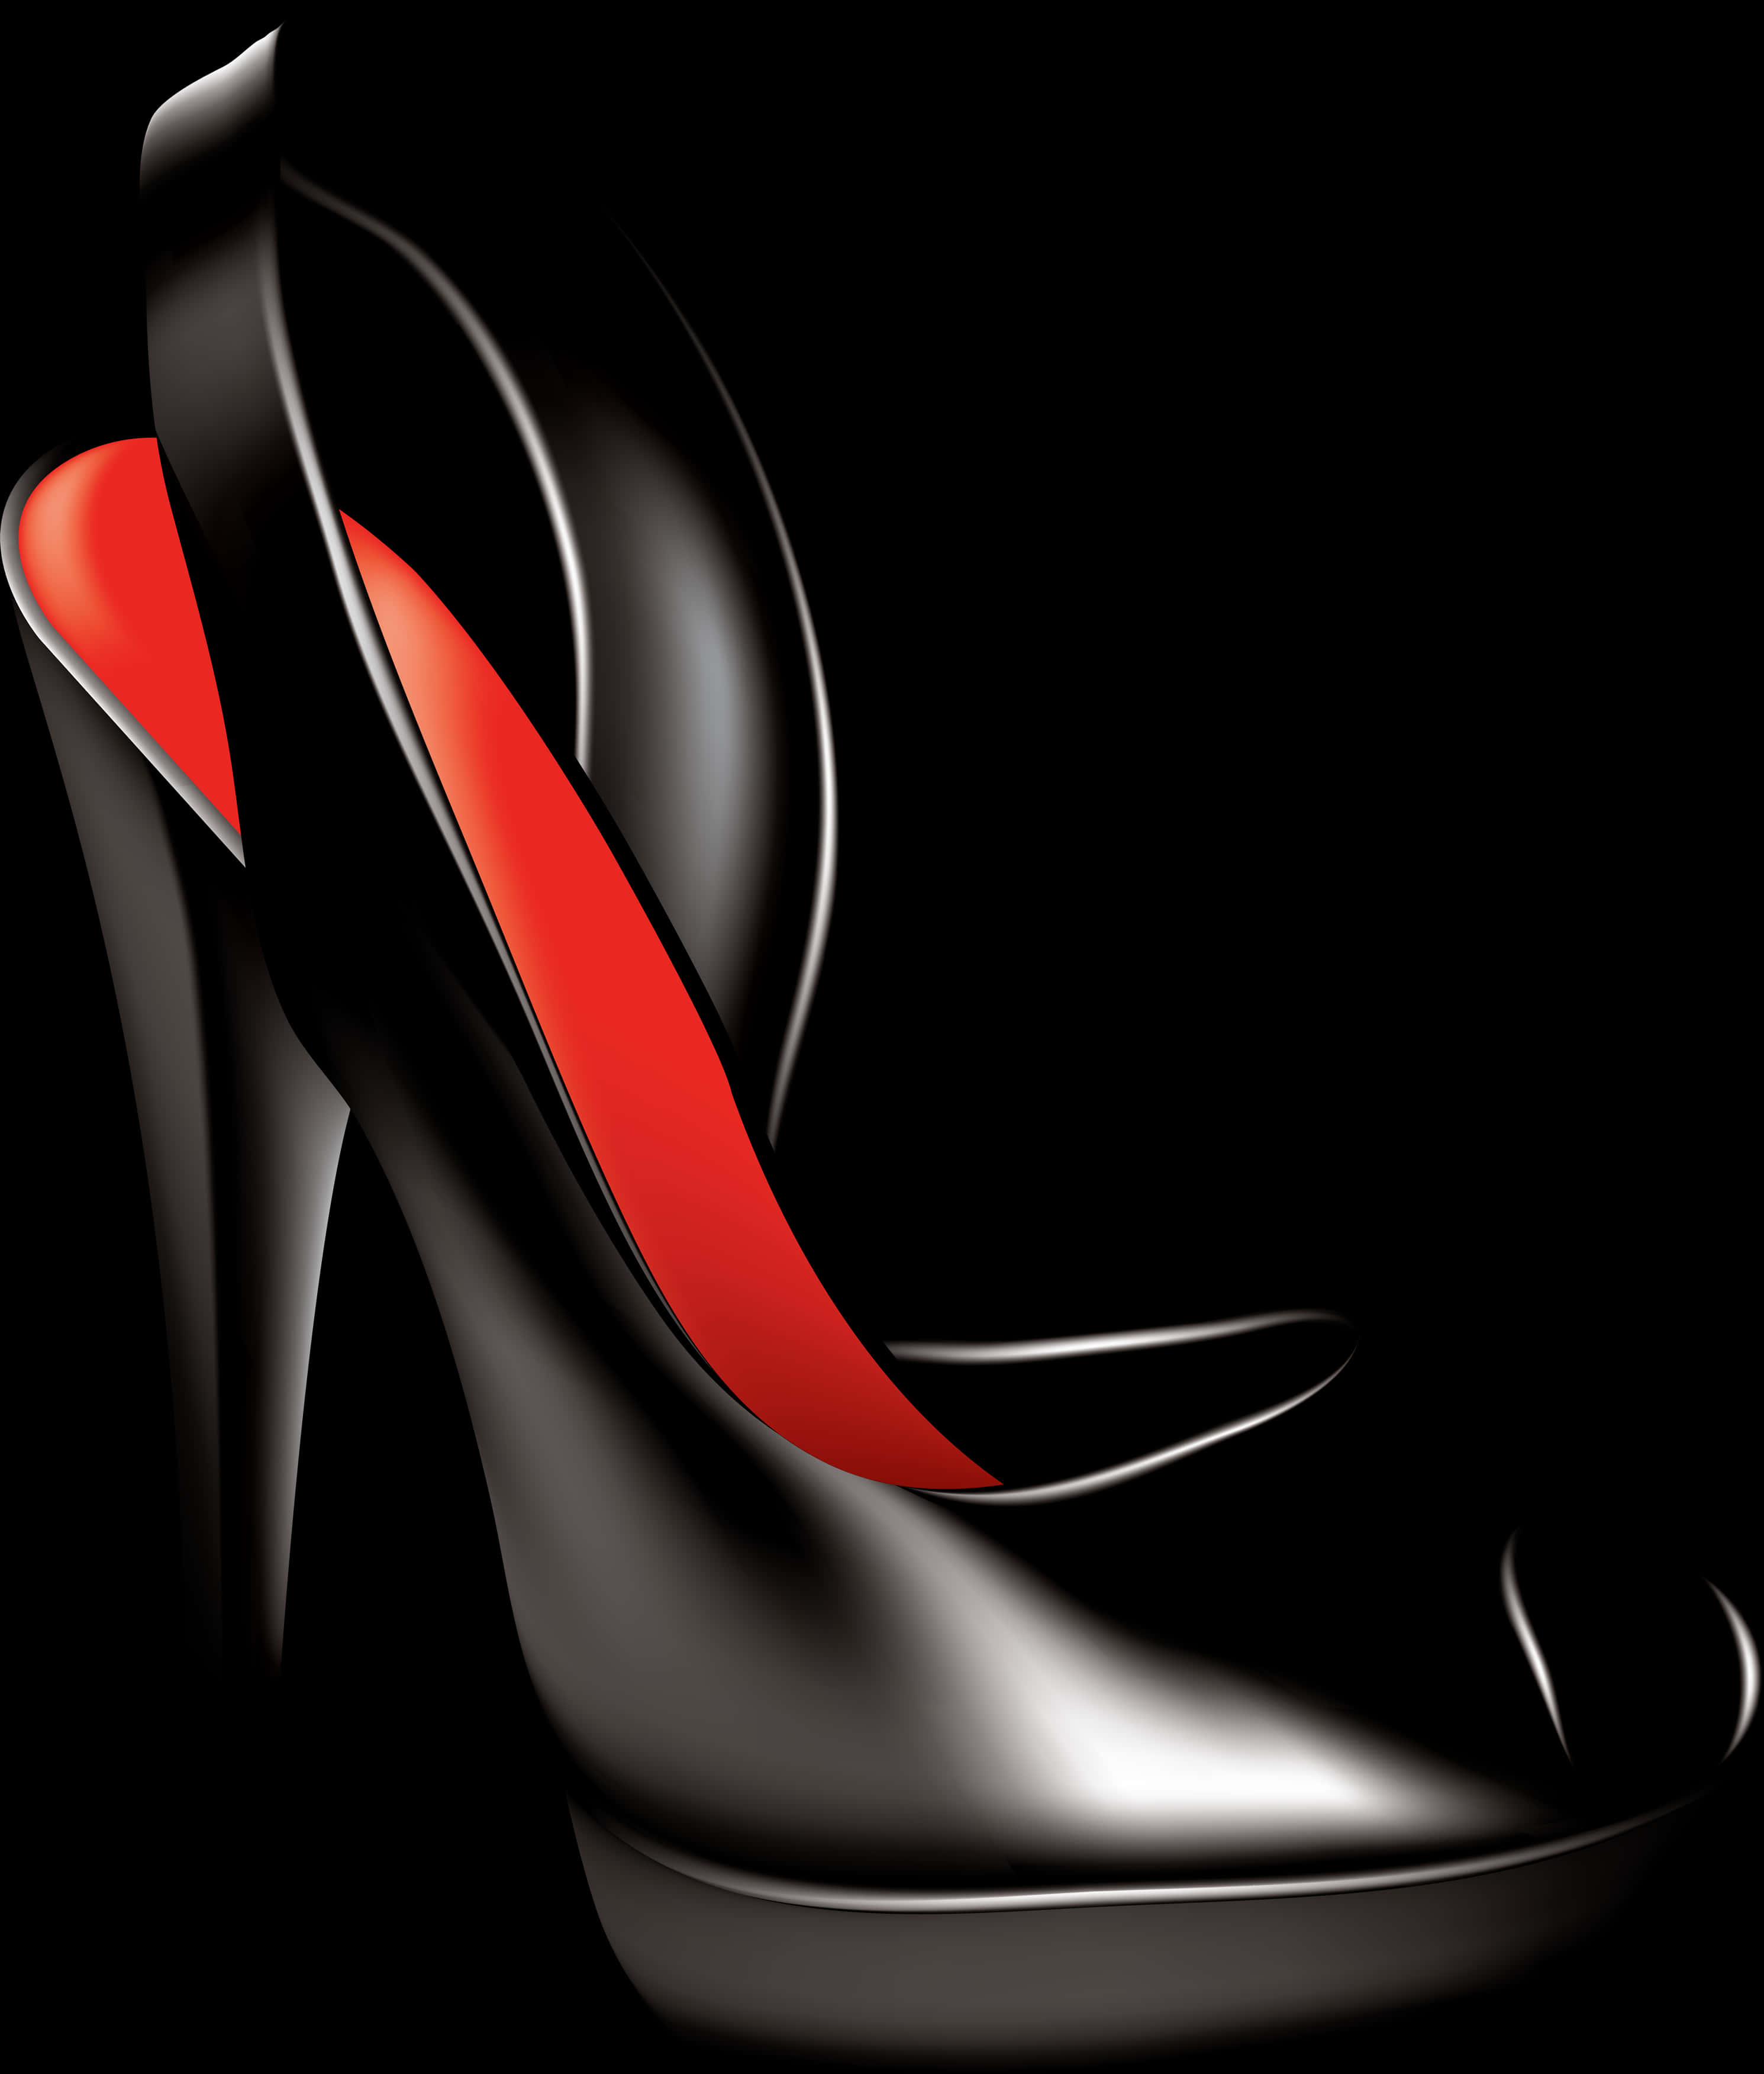 A Black High Heeled Shoe With A Red Lining